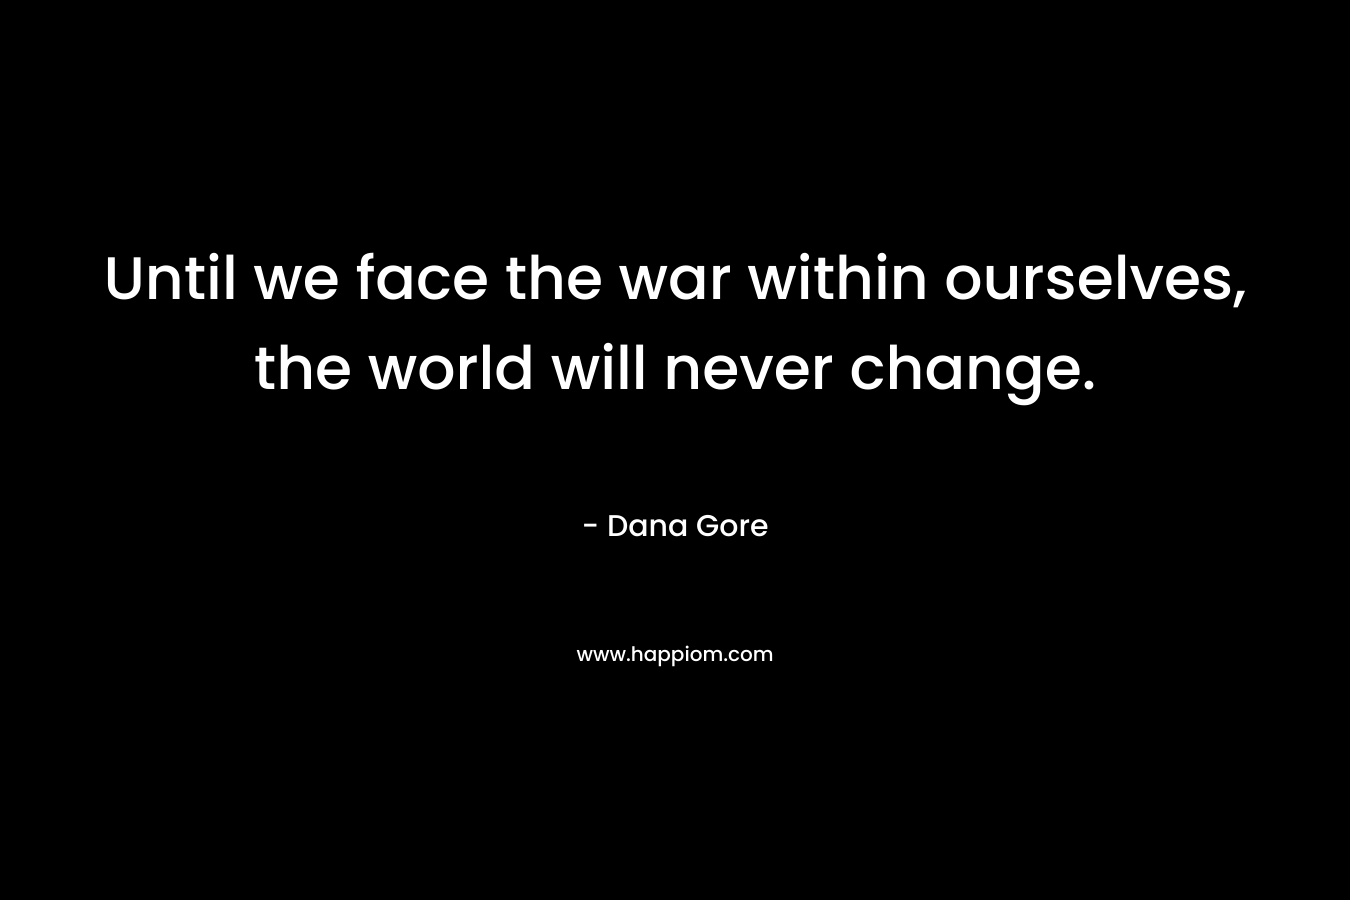 Until we face the war within ourselves, the world will never change.